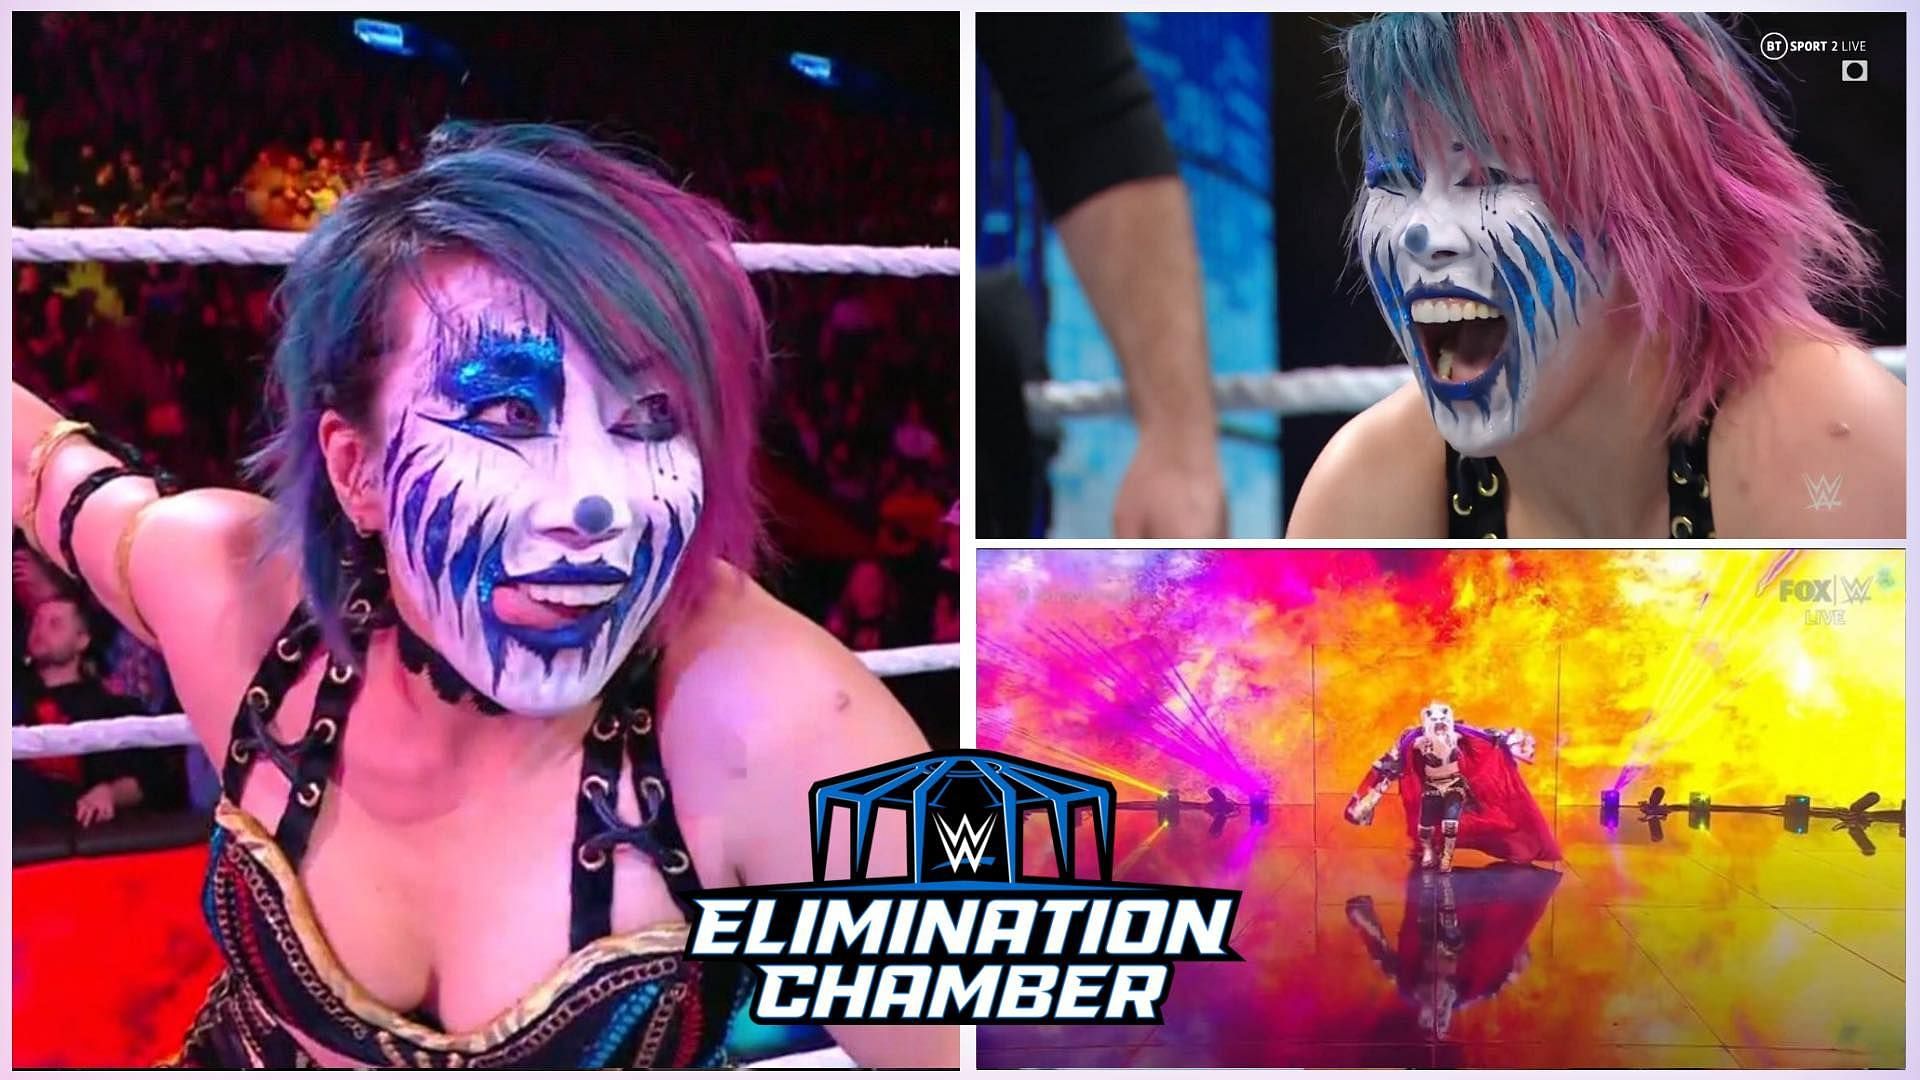 Asuka is a former RAW Women